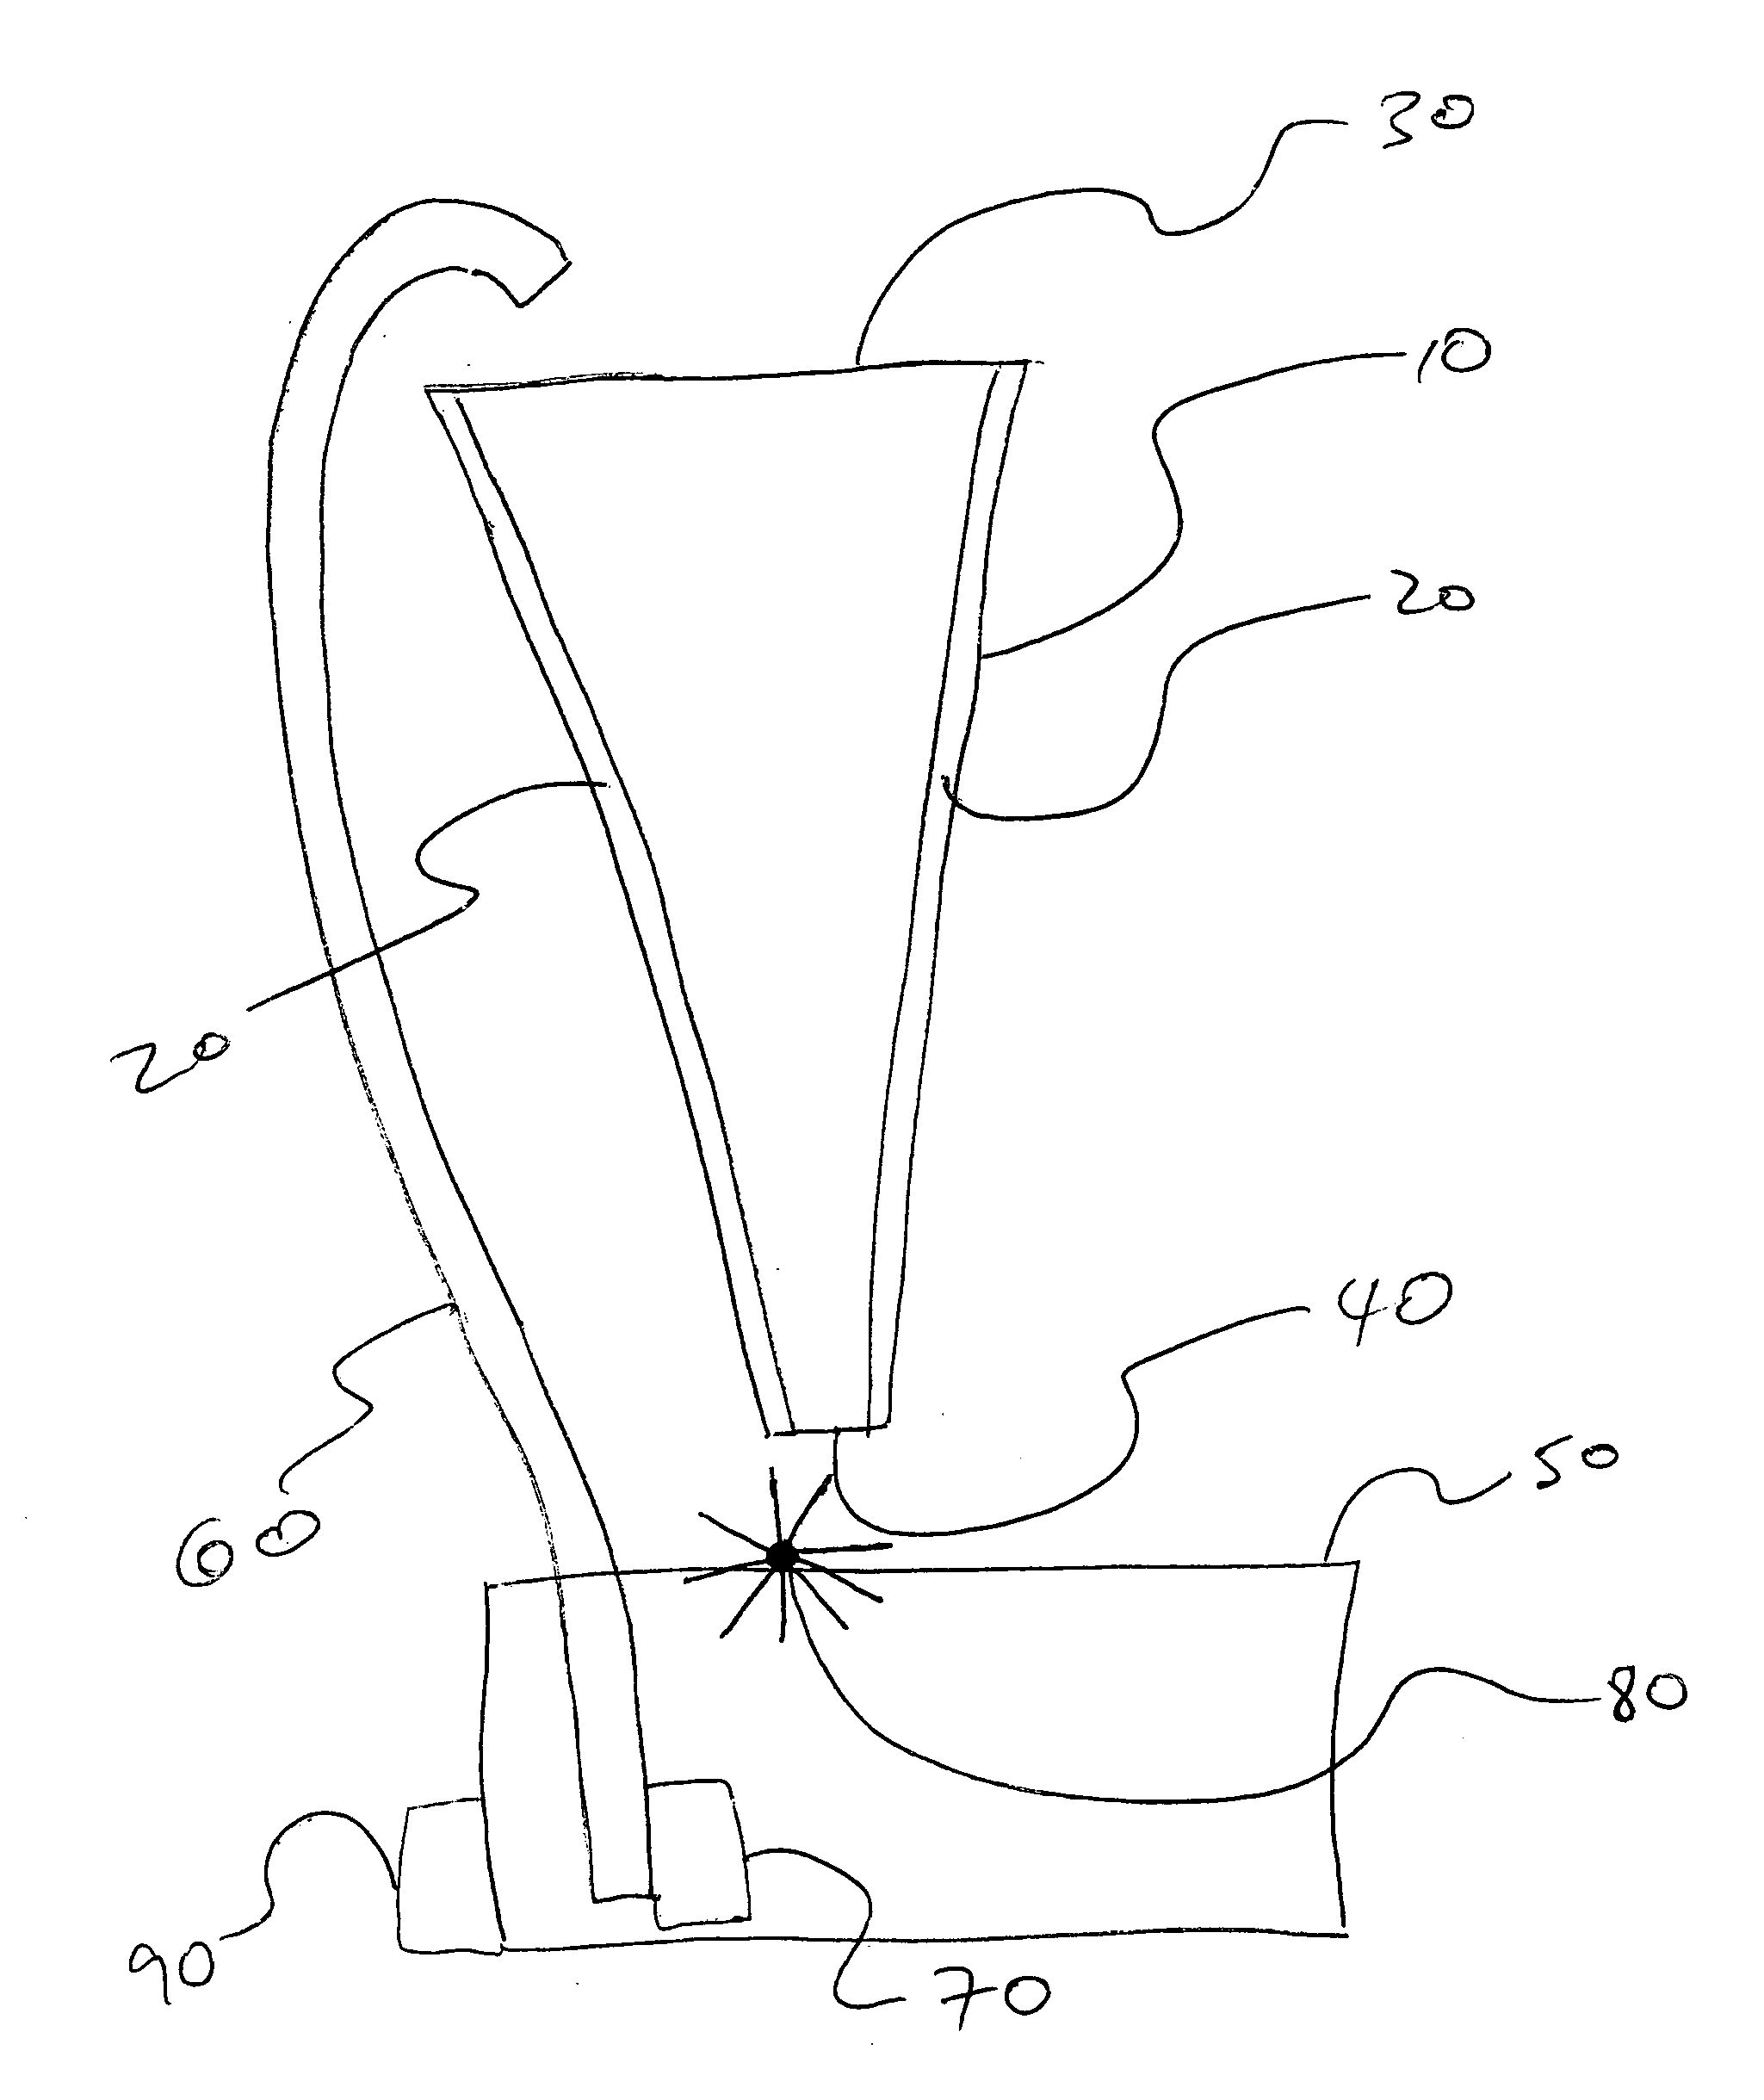 Apparatus and method for separating tritated and heavy water from light water via a conical configuration